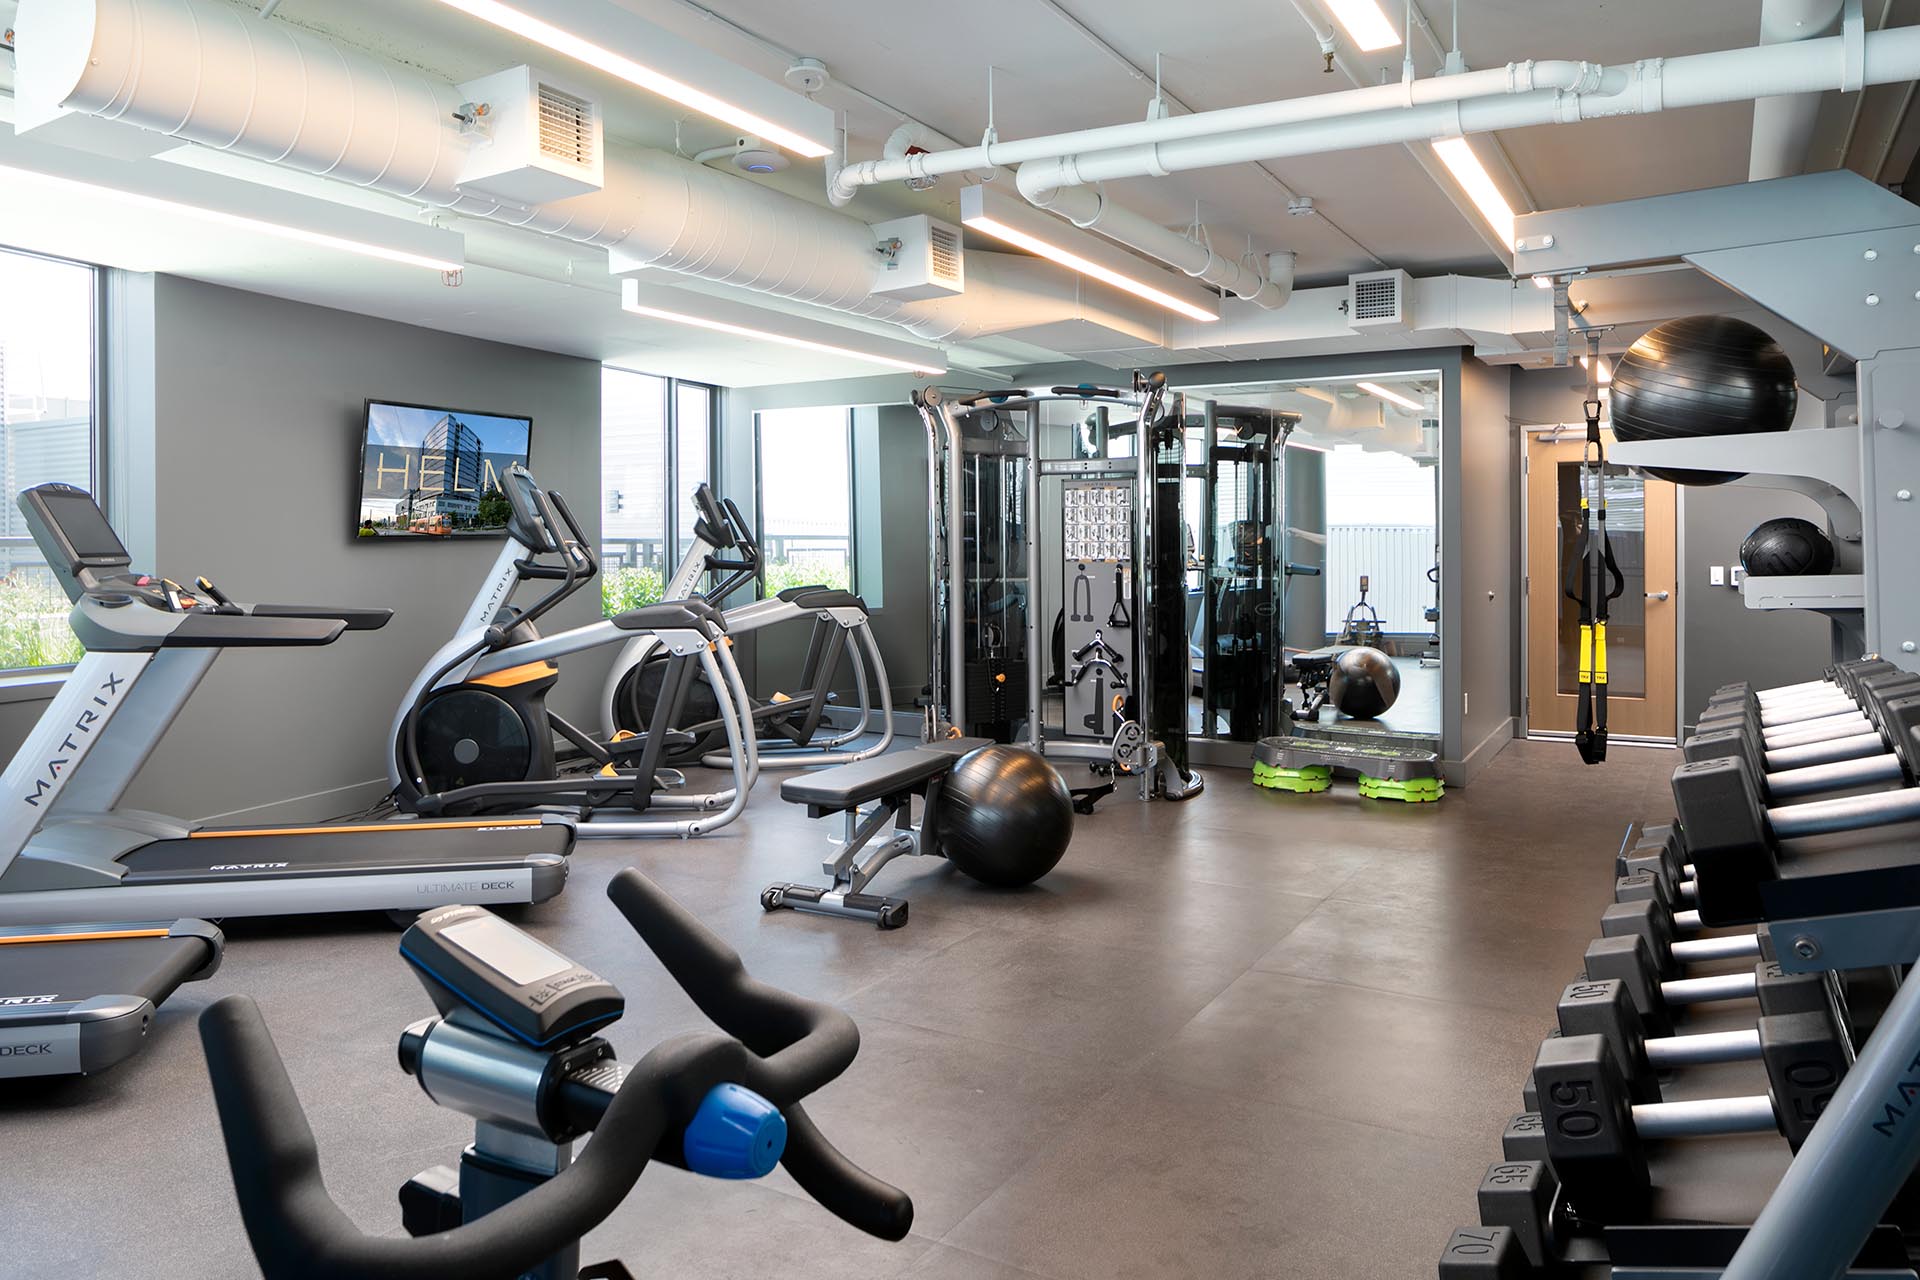 An excercise room filled with elipticals, treadmills, weights and a veriety of other gym equipment